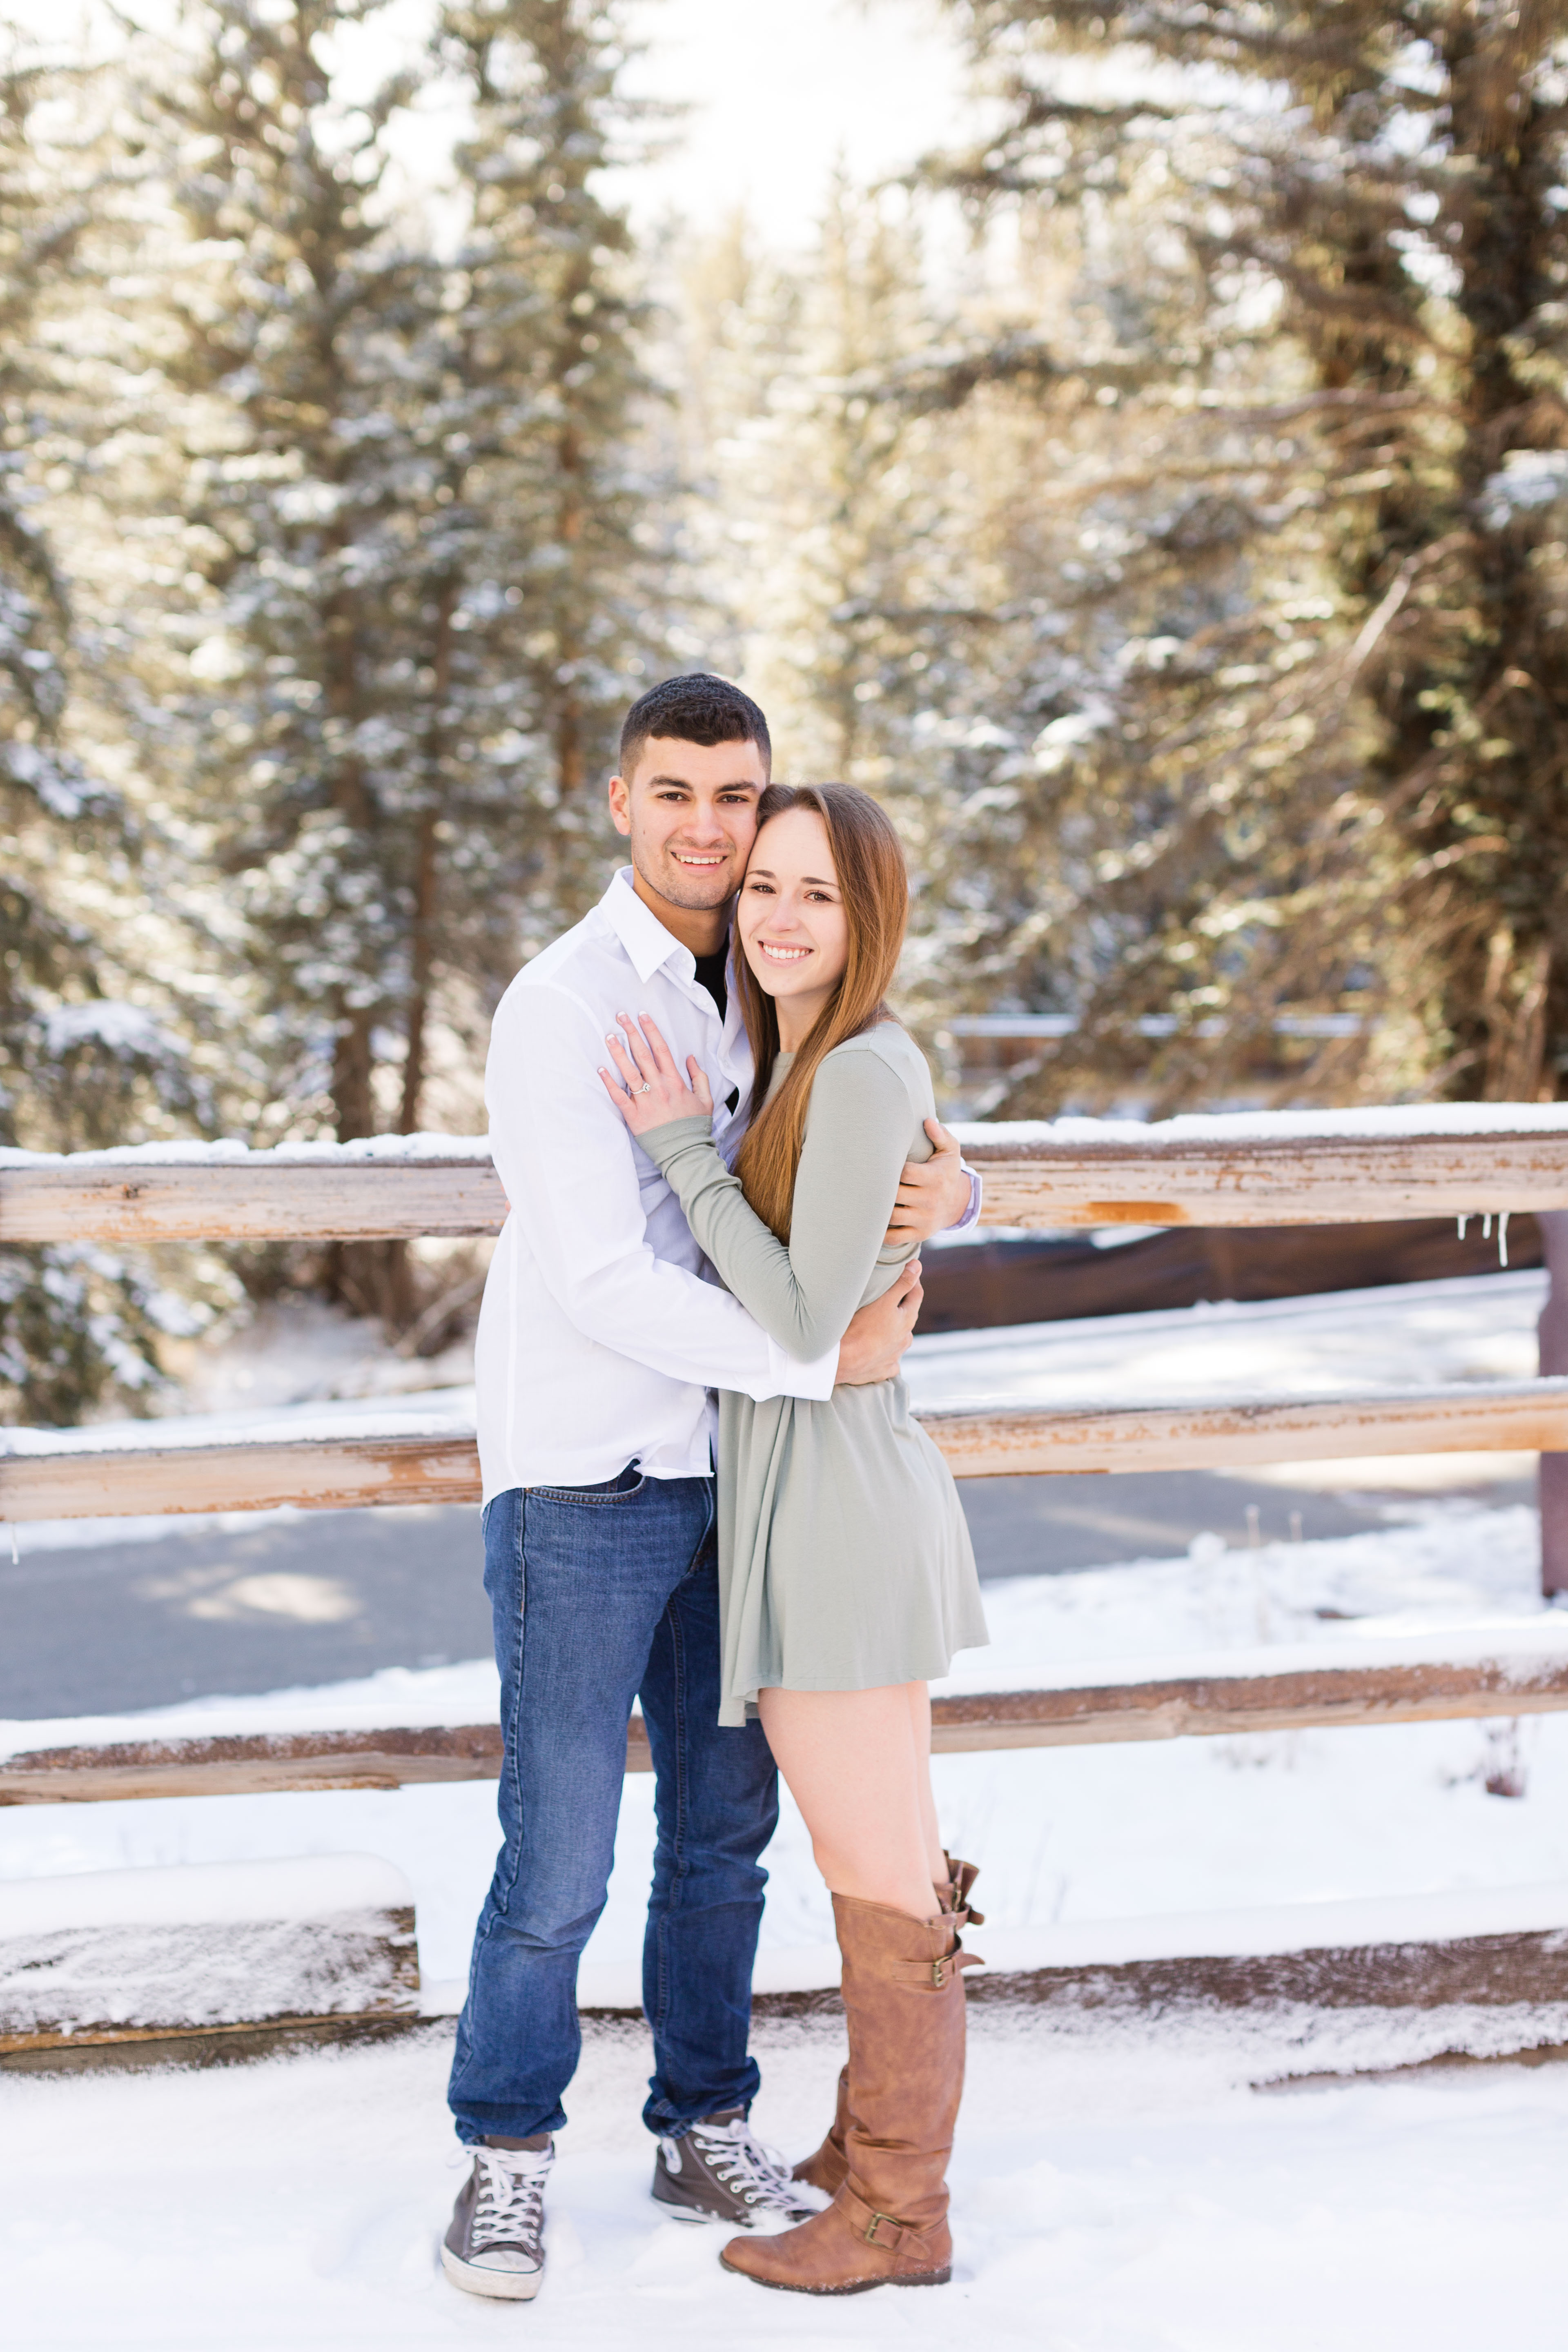 A couple hold each other and smile in front of a snow covered fence and pine trees